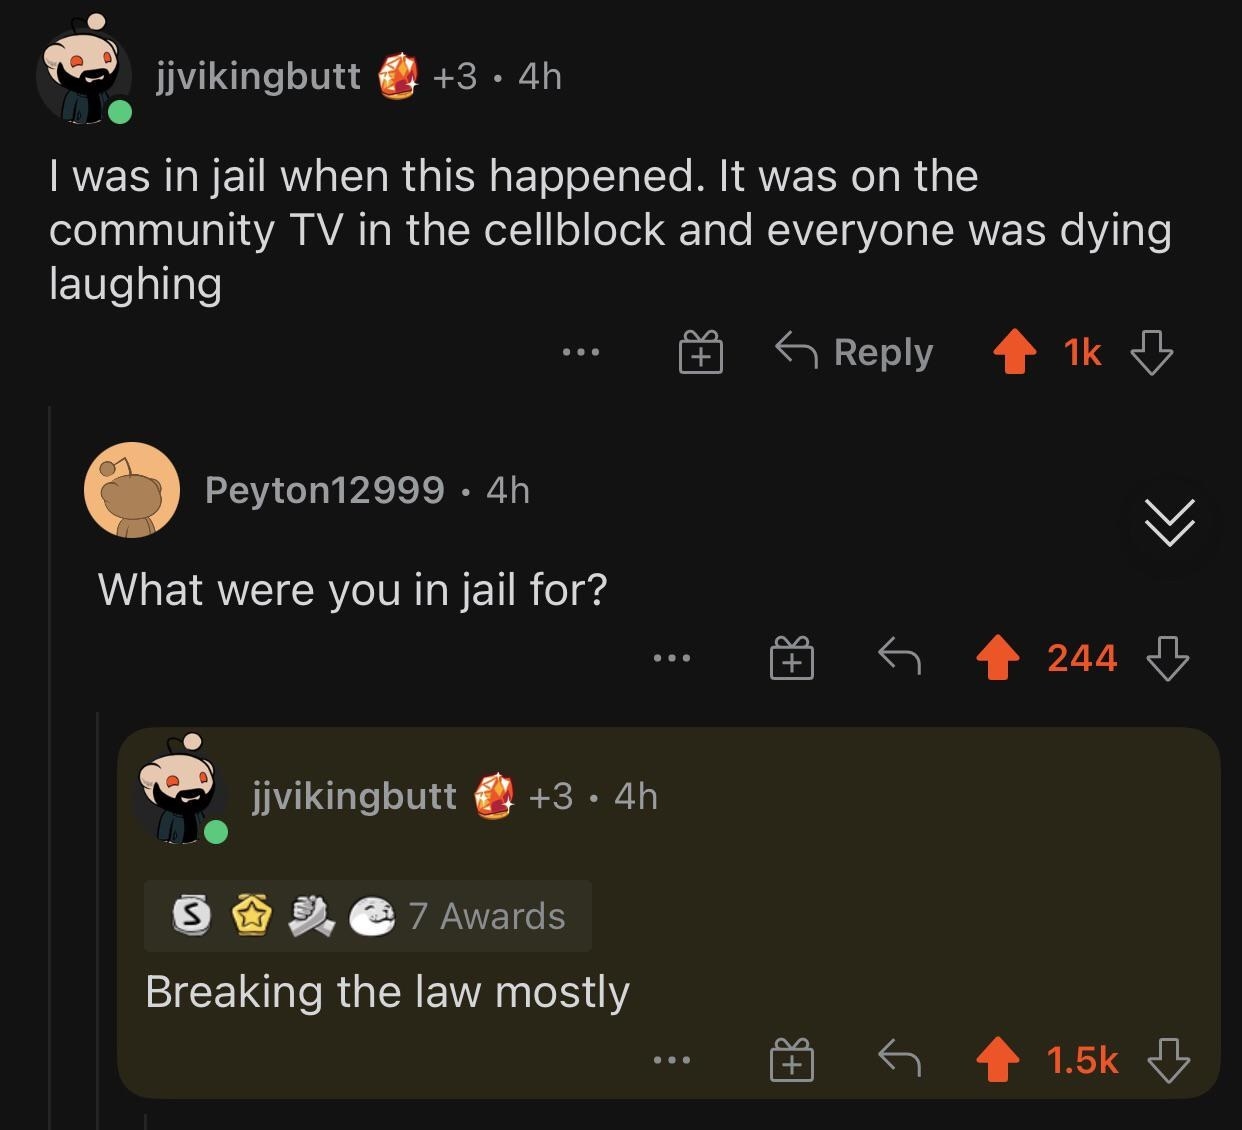 someone asks someone why they were in jail and they say for breaking the law